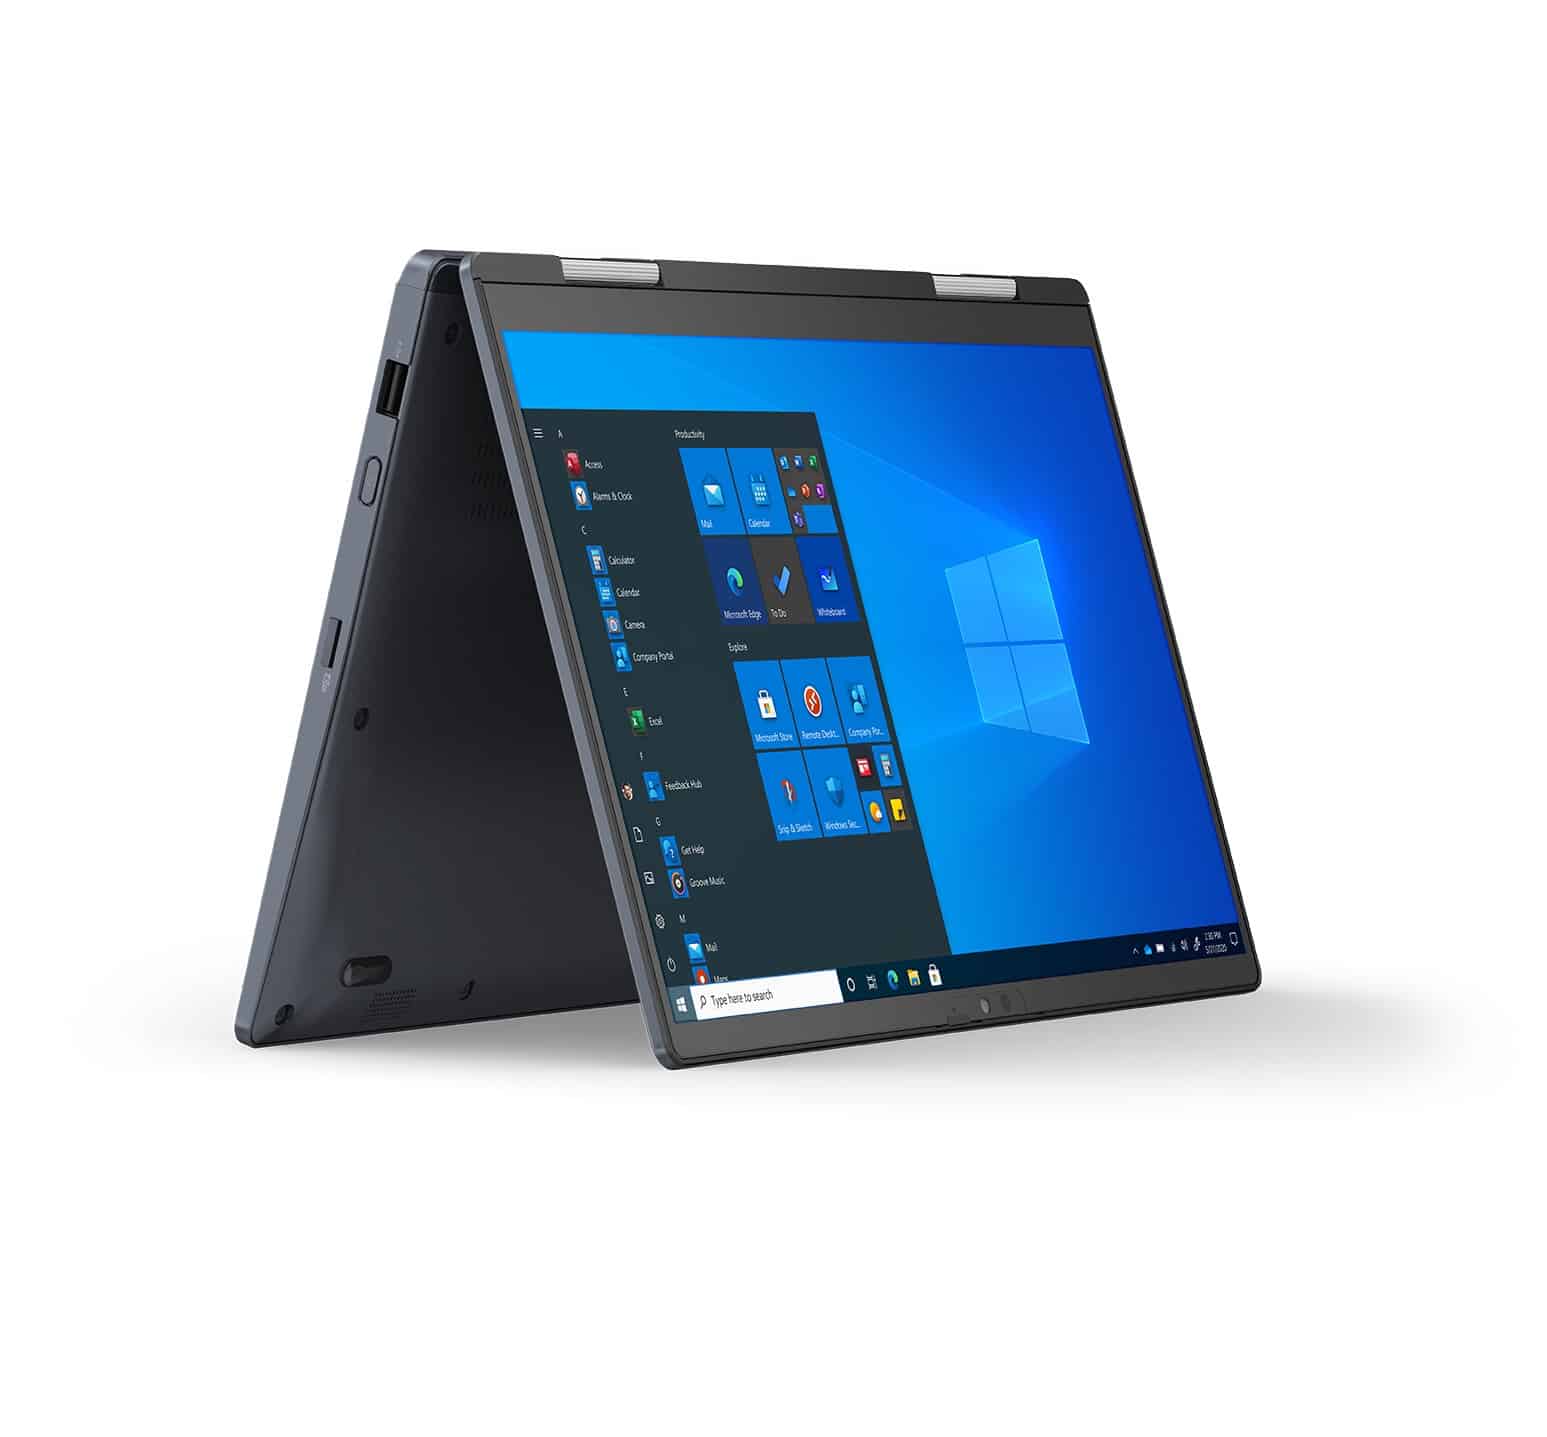 Dynabook announces the world's lightest convertible laptop with 11th Generation Intel Processors